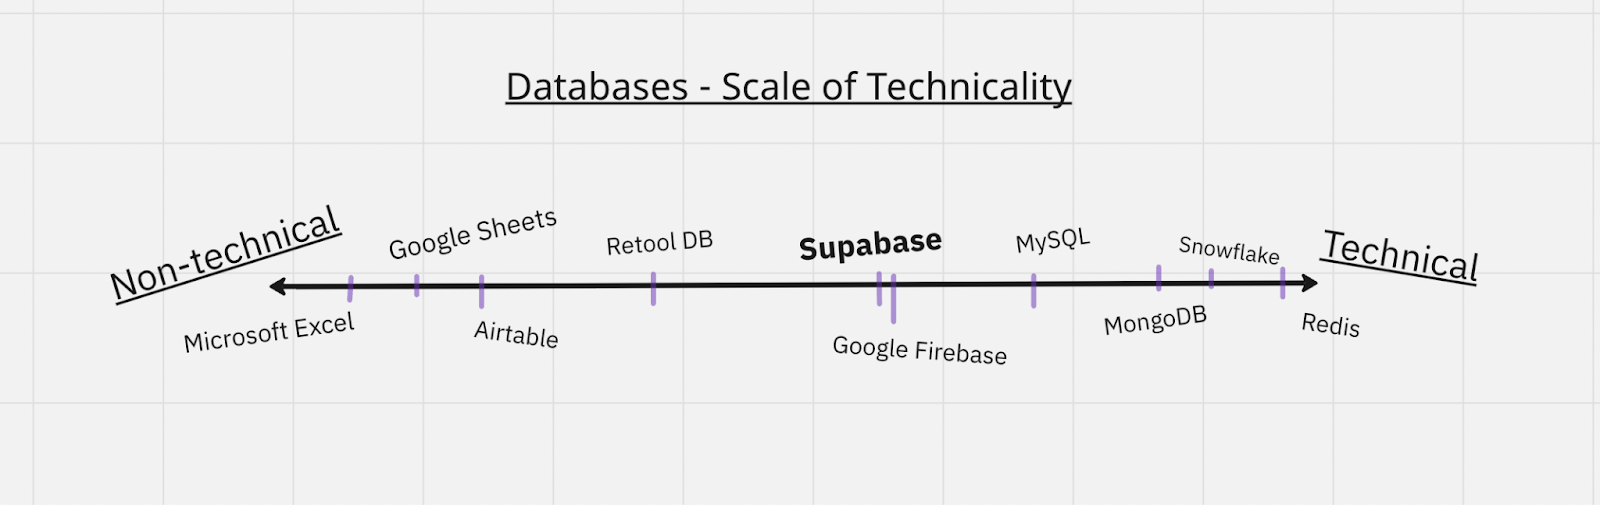 Scale of technicality for databases, starting with spreadsheets and ending with Snowflake/Redis